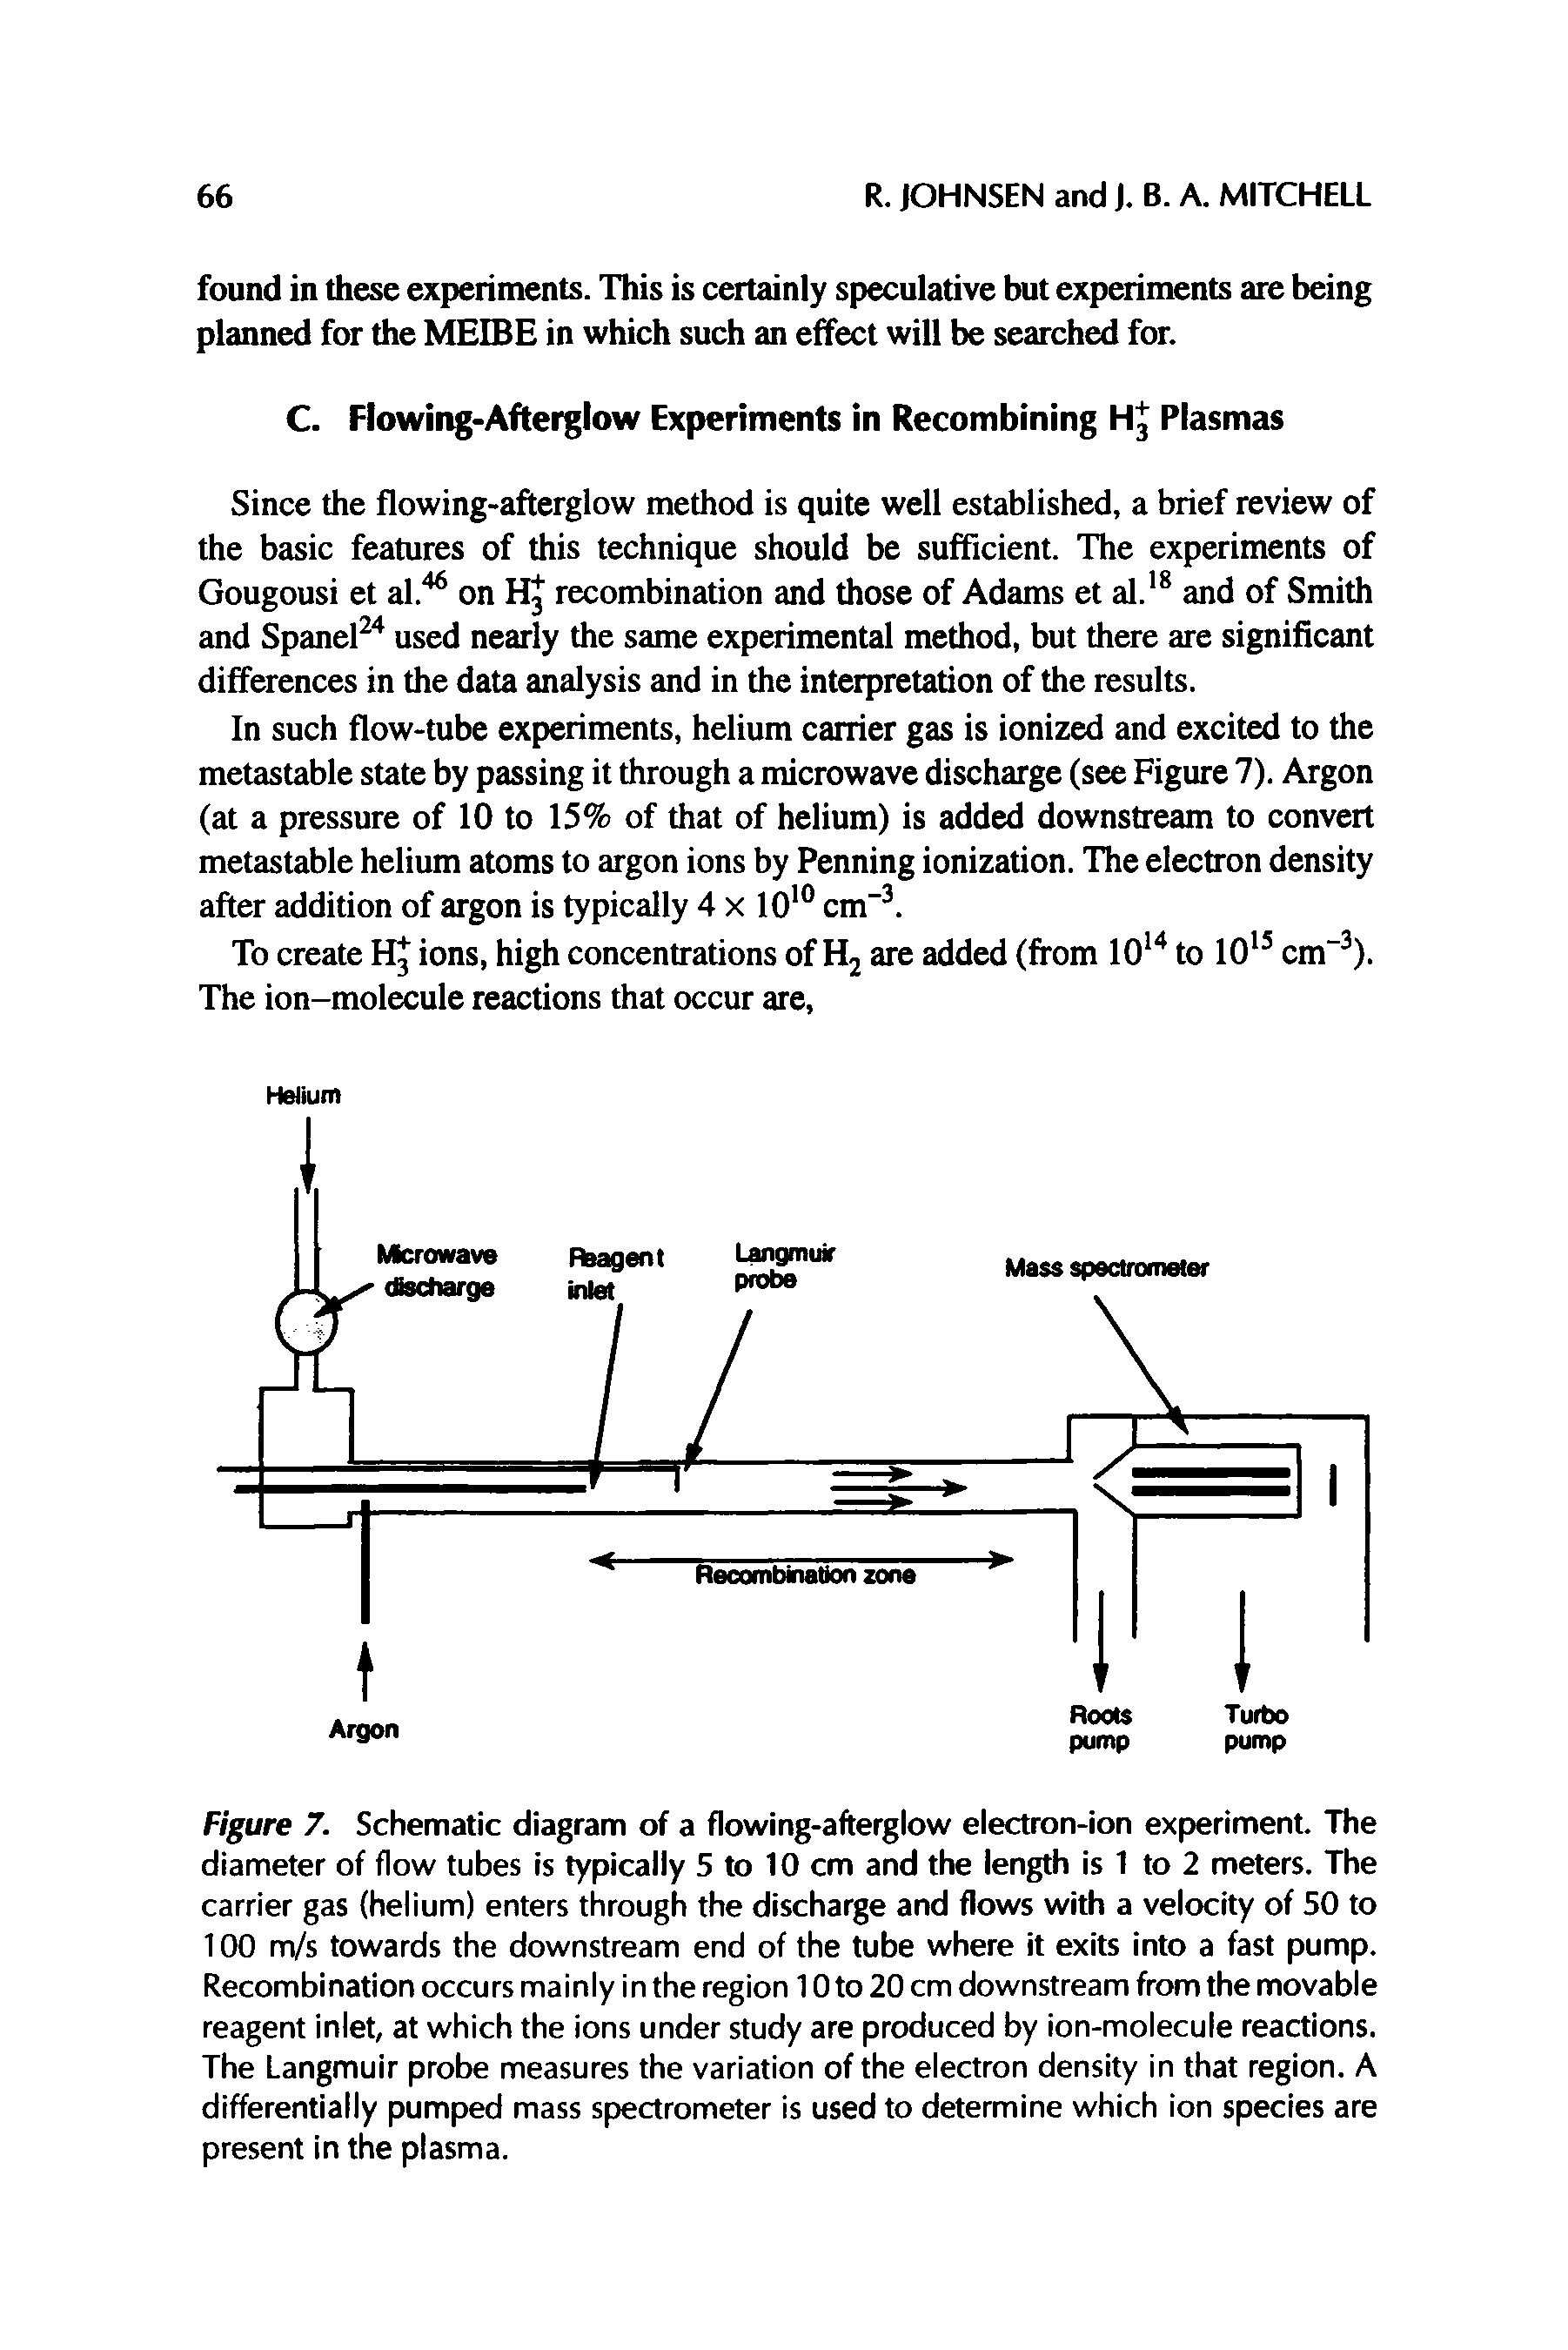 Figure 7. Schematic diagram of a flowing-afterglow electron-ion experiment. The diameter of flow tubes is typically 5 to 10 cm and the length is 1 to 2 meters. The carrier gas (helium) enters through the discharge and flows with a velocity of 50 to 100 m/s towards the downstream end of the tube where it exits into a fast pump. Recombination occurs mainly in the region 10 to 20 cm downstream from the movable reagent inlet, at which the ions under study are produced by ion-molecule reactions. The Langmuir probe measures the variation of the electron density in that region. A differentially pumped mass spectrometer is used to determine which ion species are present in the plasma.